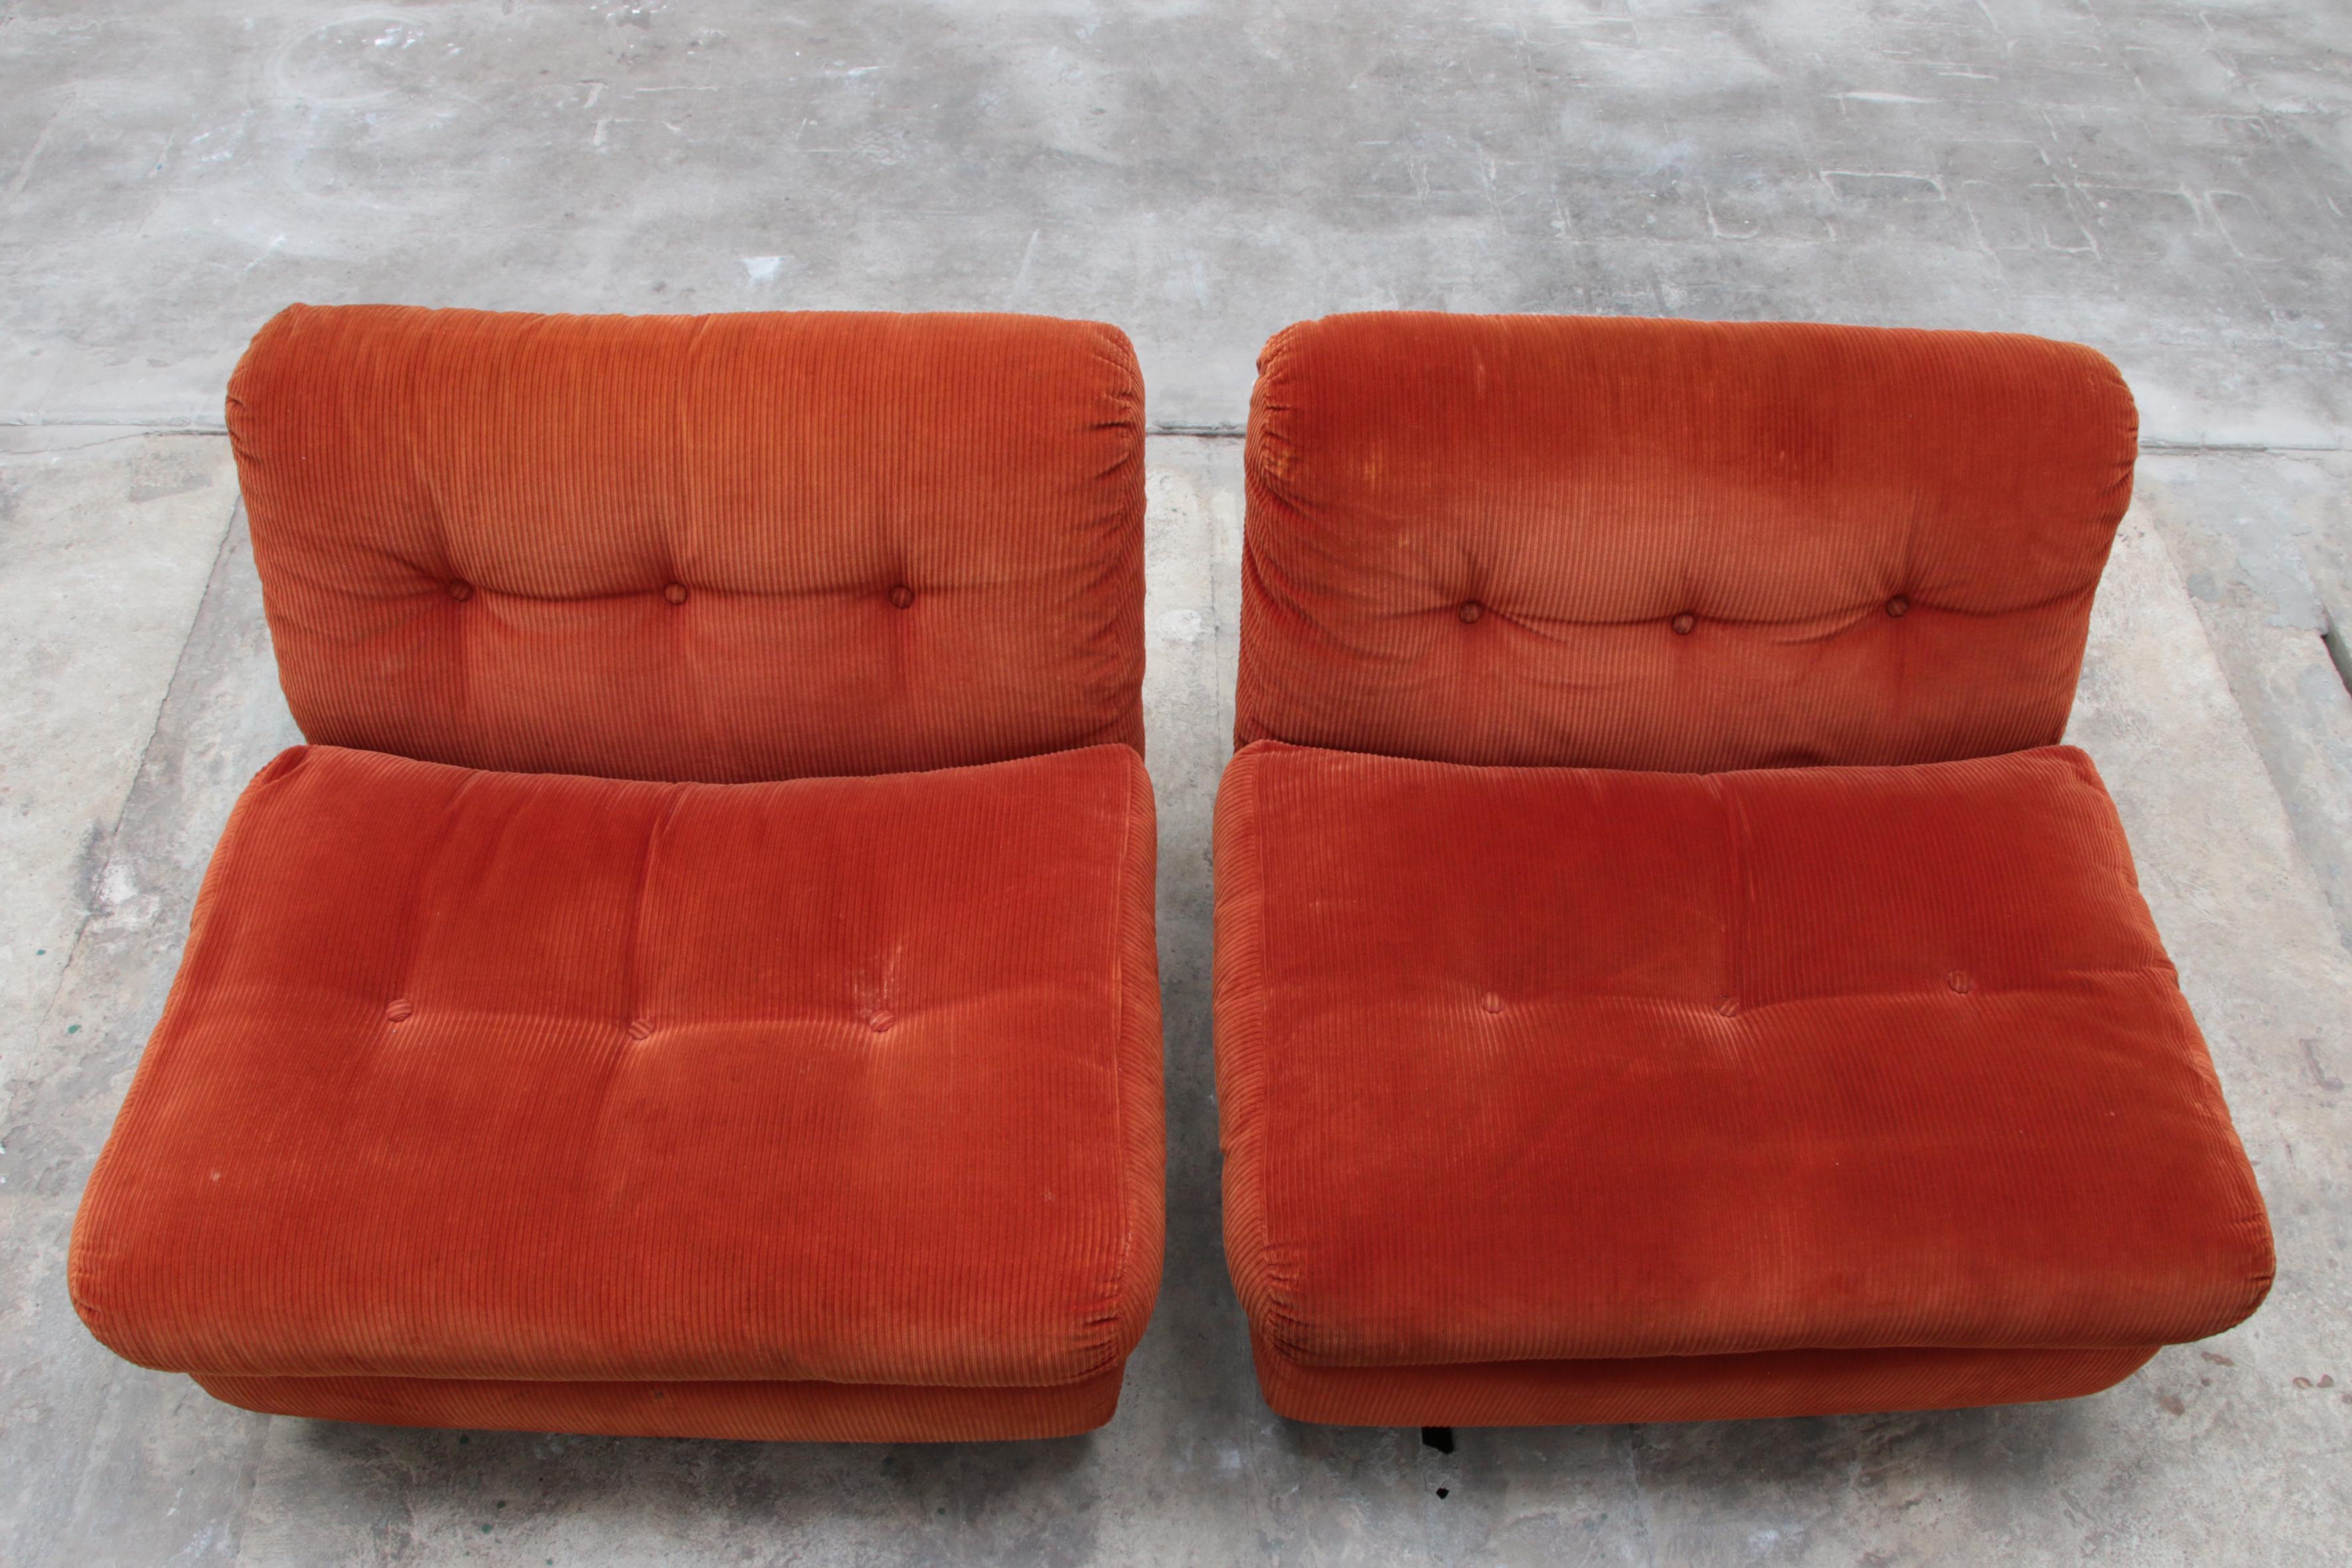 Fiberglass Amanta Lounge chairs by Mario Bellini for C&B Italy, 1963